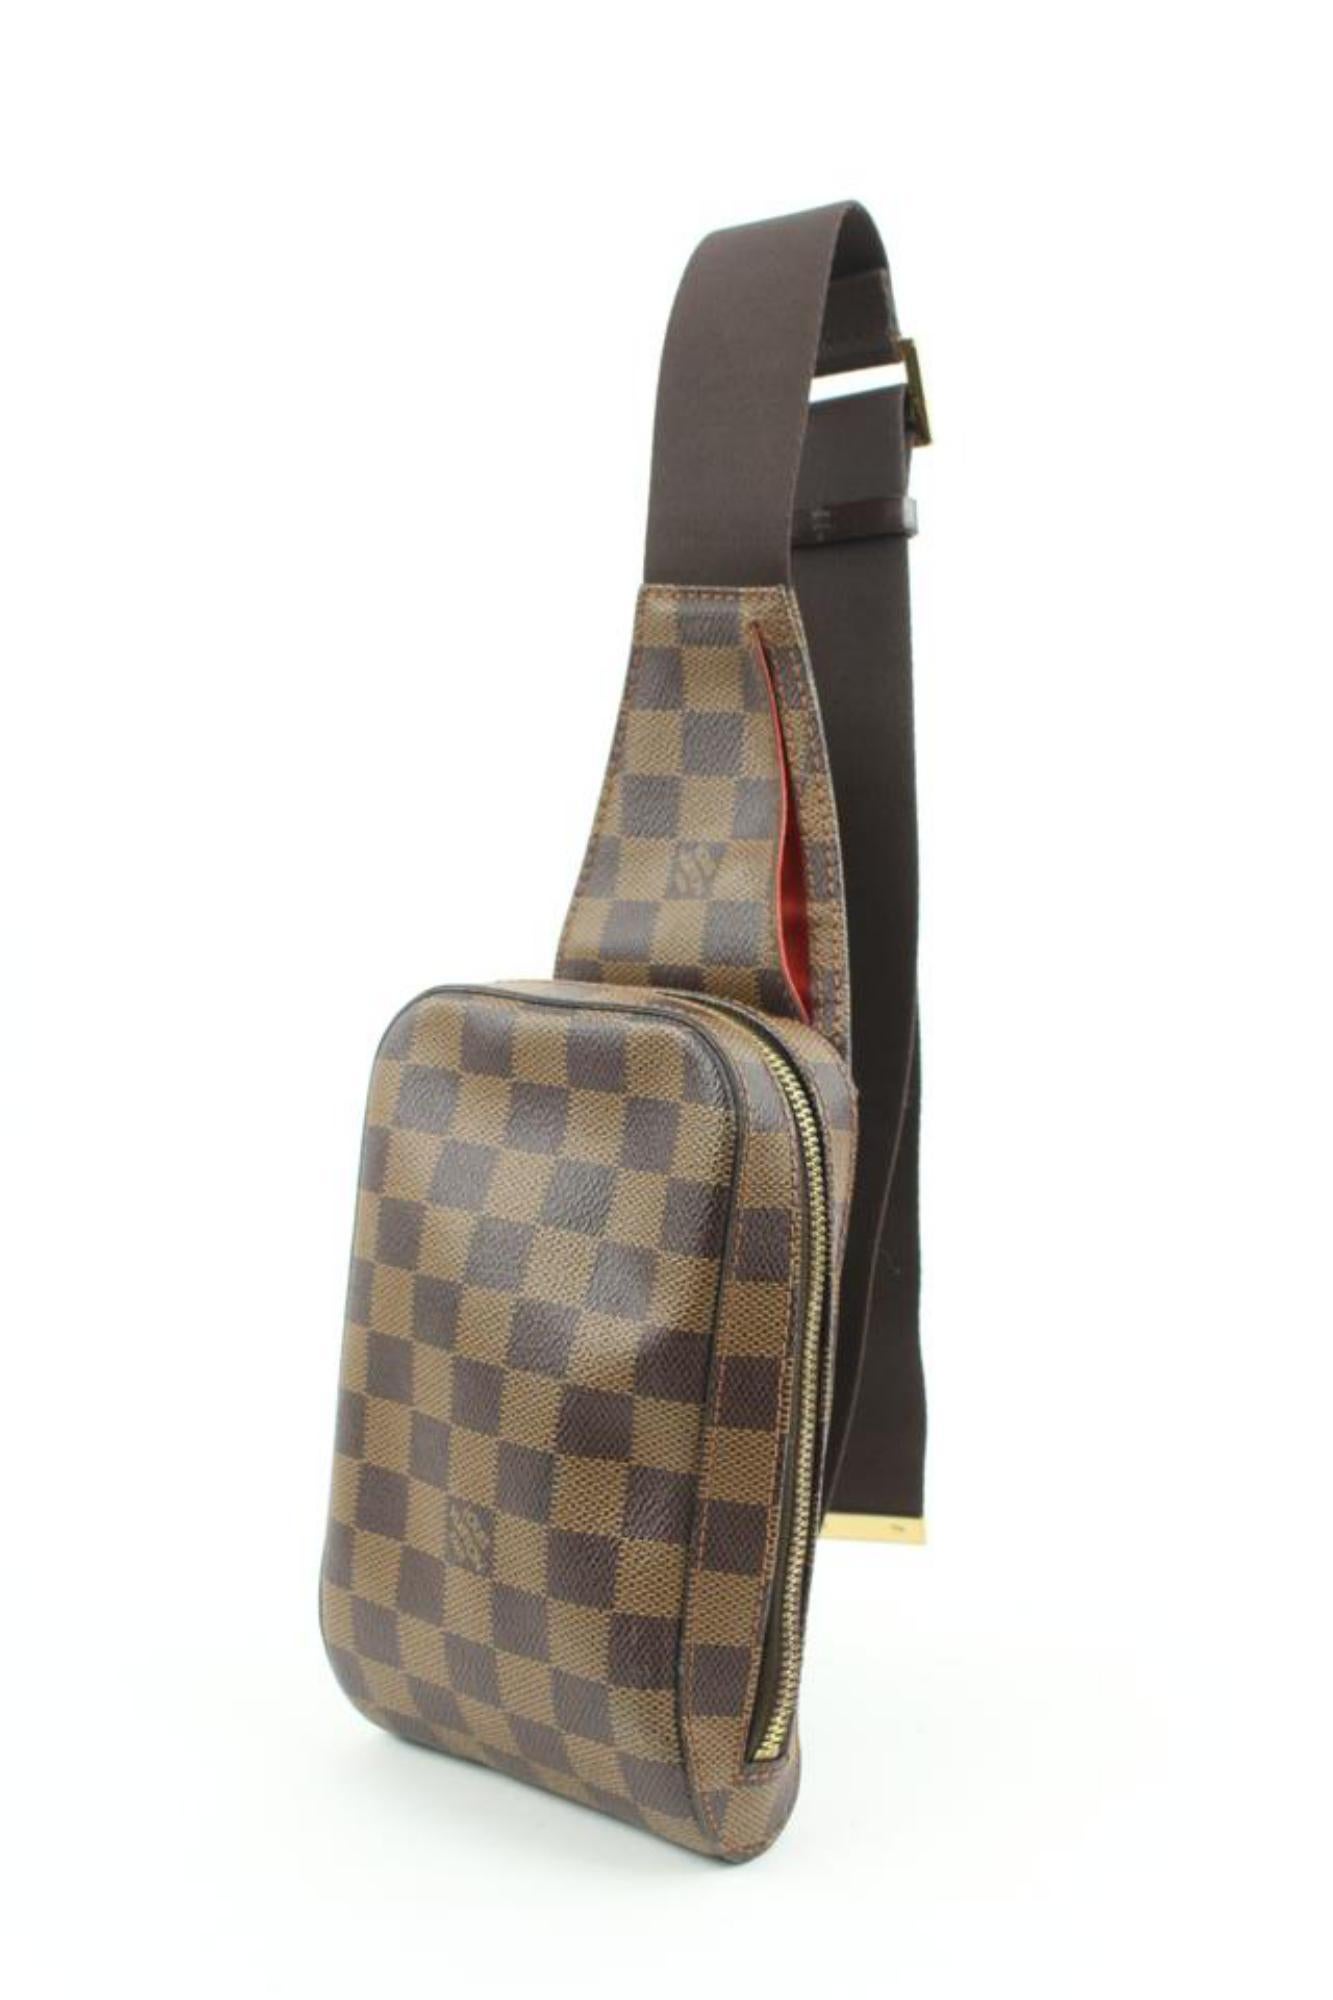 Louis Vuitton Damier Ebene Geronimos Body Bag Waist Pouch 119lv49
Date Code/Serial Number: CA1014
Made In: Spain
Measurements: Length:  4.5